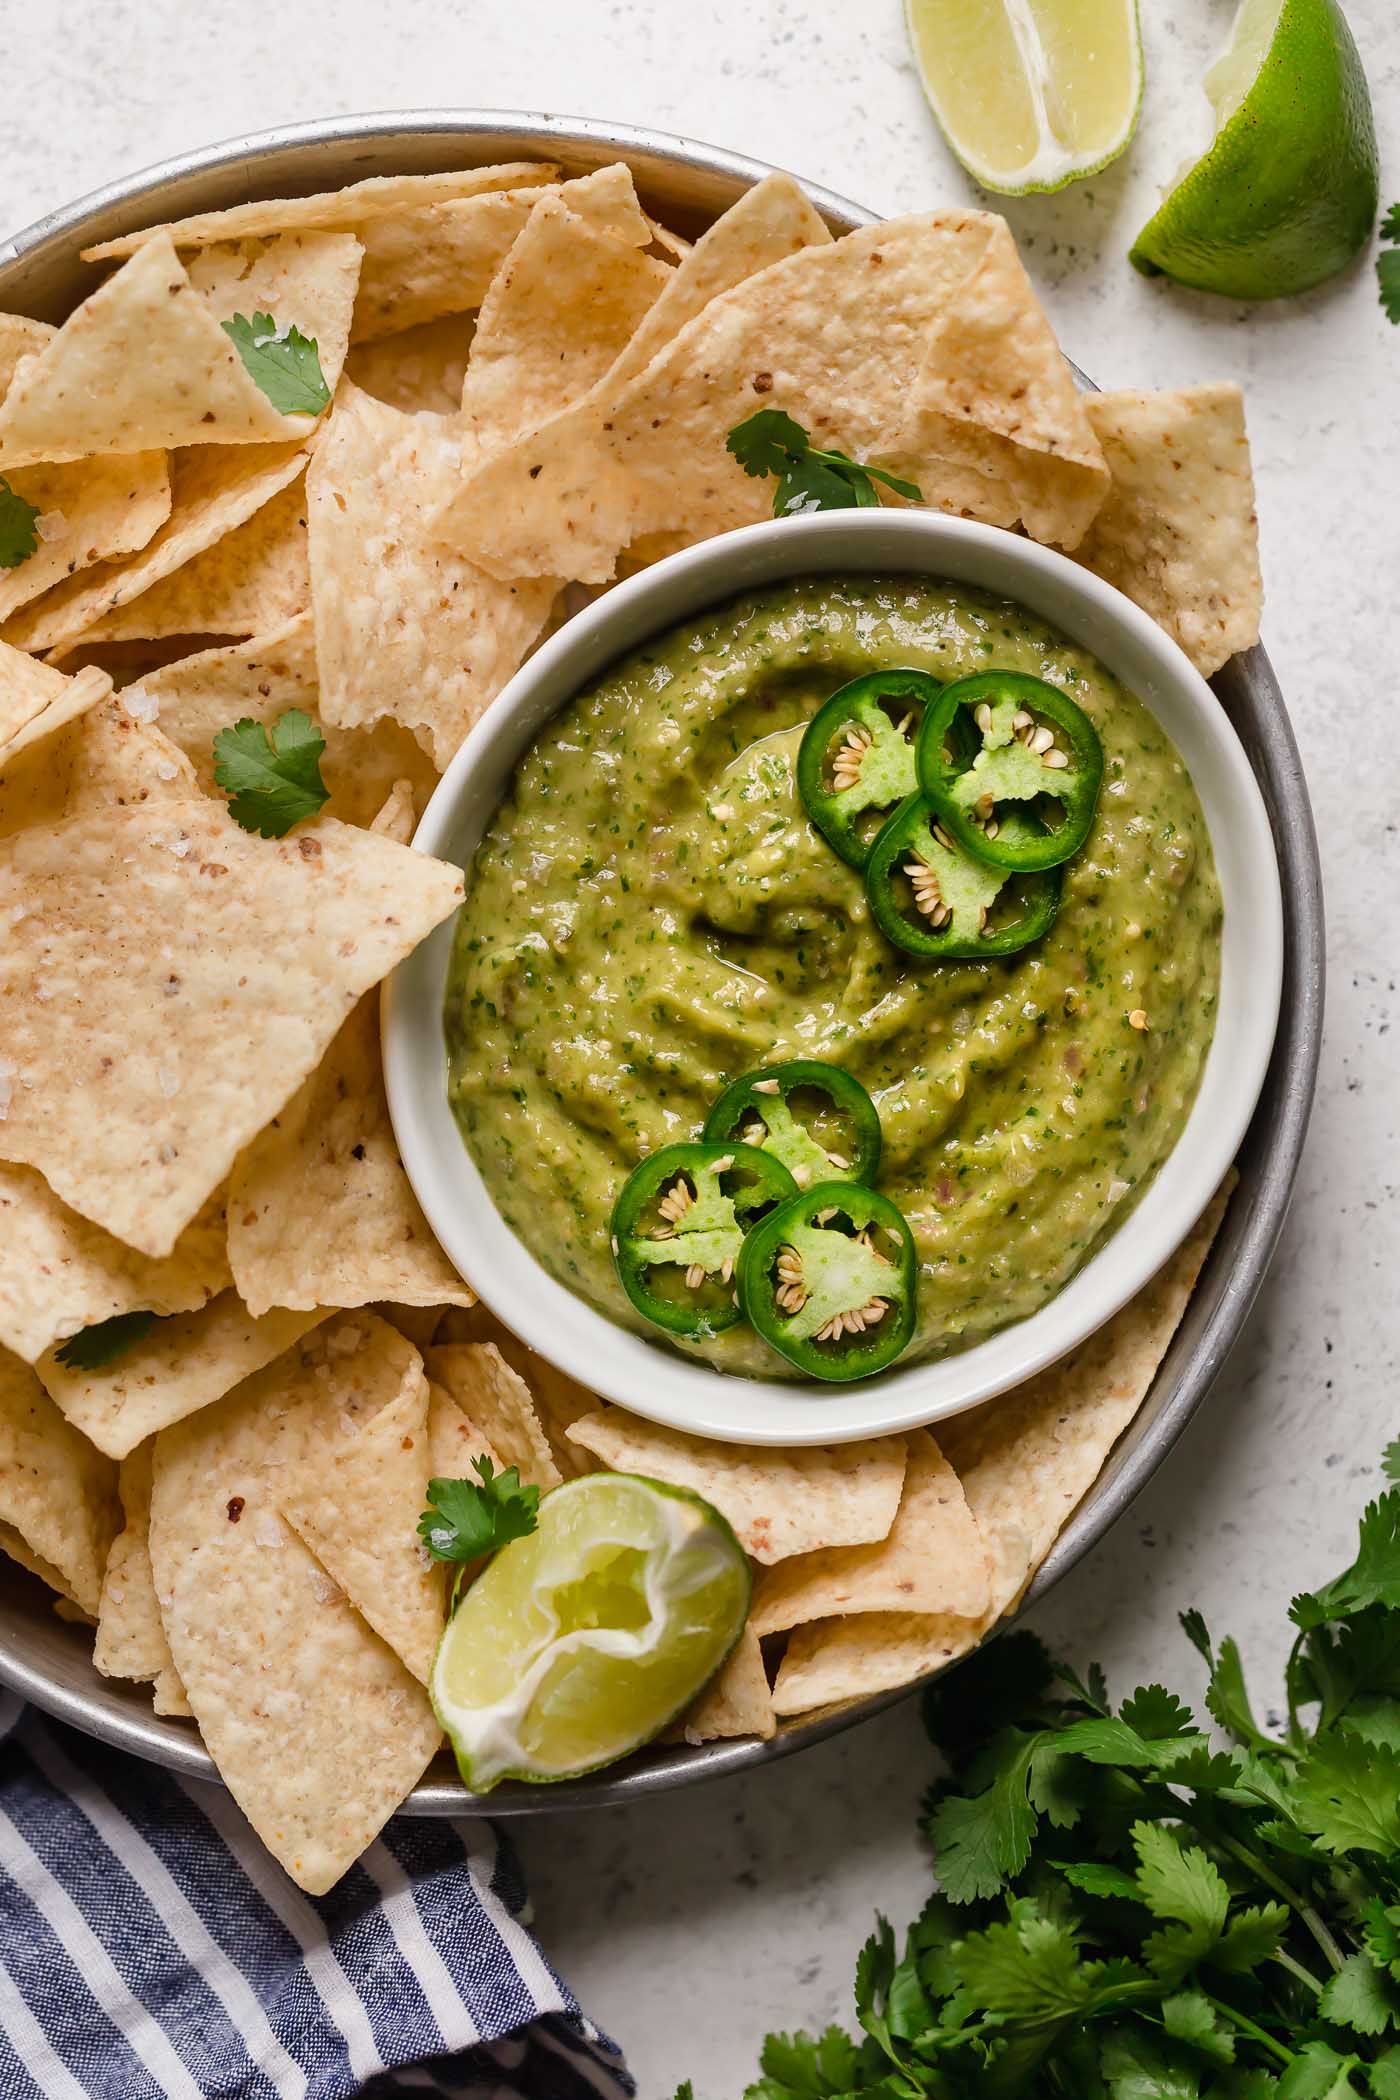 a classic salsa verde recipe with a twist, this creamy salsa verde is full of bright flavors (from tomatillos, peppers, cilantro, & lime juice), & gets tons of creaminess from avocado. this creamy salsa verde recipe is easy to make, & even easier to eat! say hello to your new favorite game day snack! #playswellwithbutter #salsaverde #easysalsaverderecipe #creamysalsaverde #tomatillosalsa #tomatillorecipes #tomatillosauce #easyveganrecipes #vegansnack #gamedaysnacks #gamedayappetizer #gamedayfood